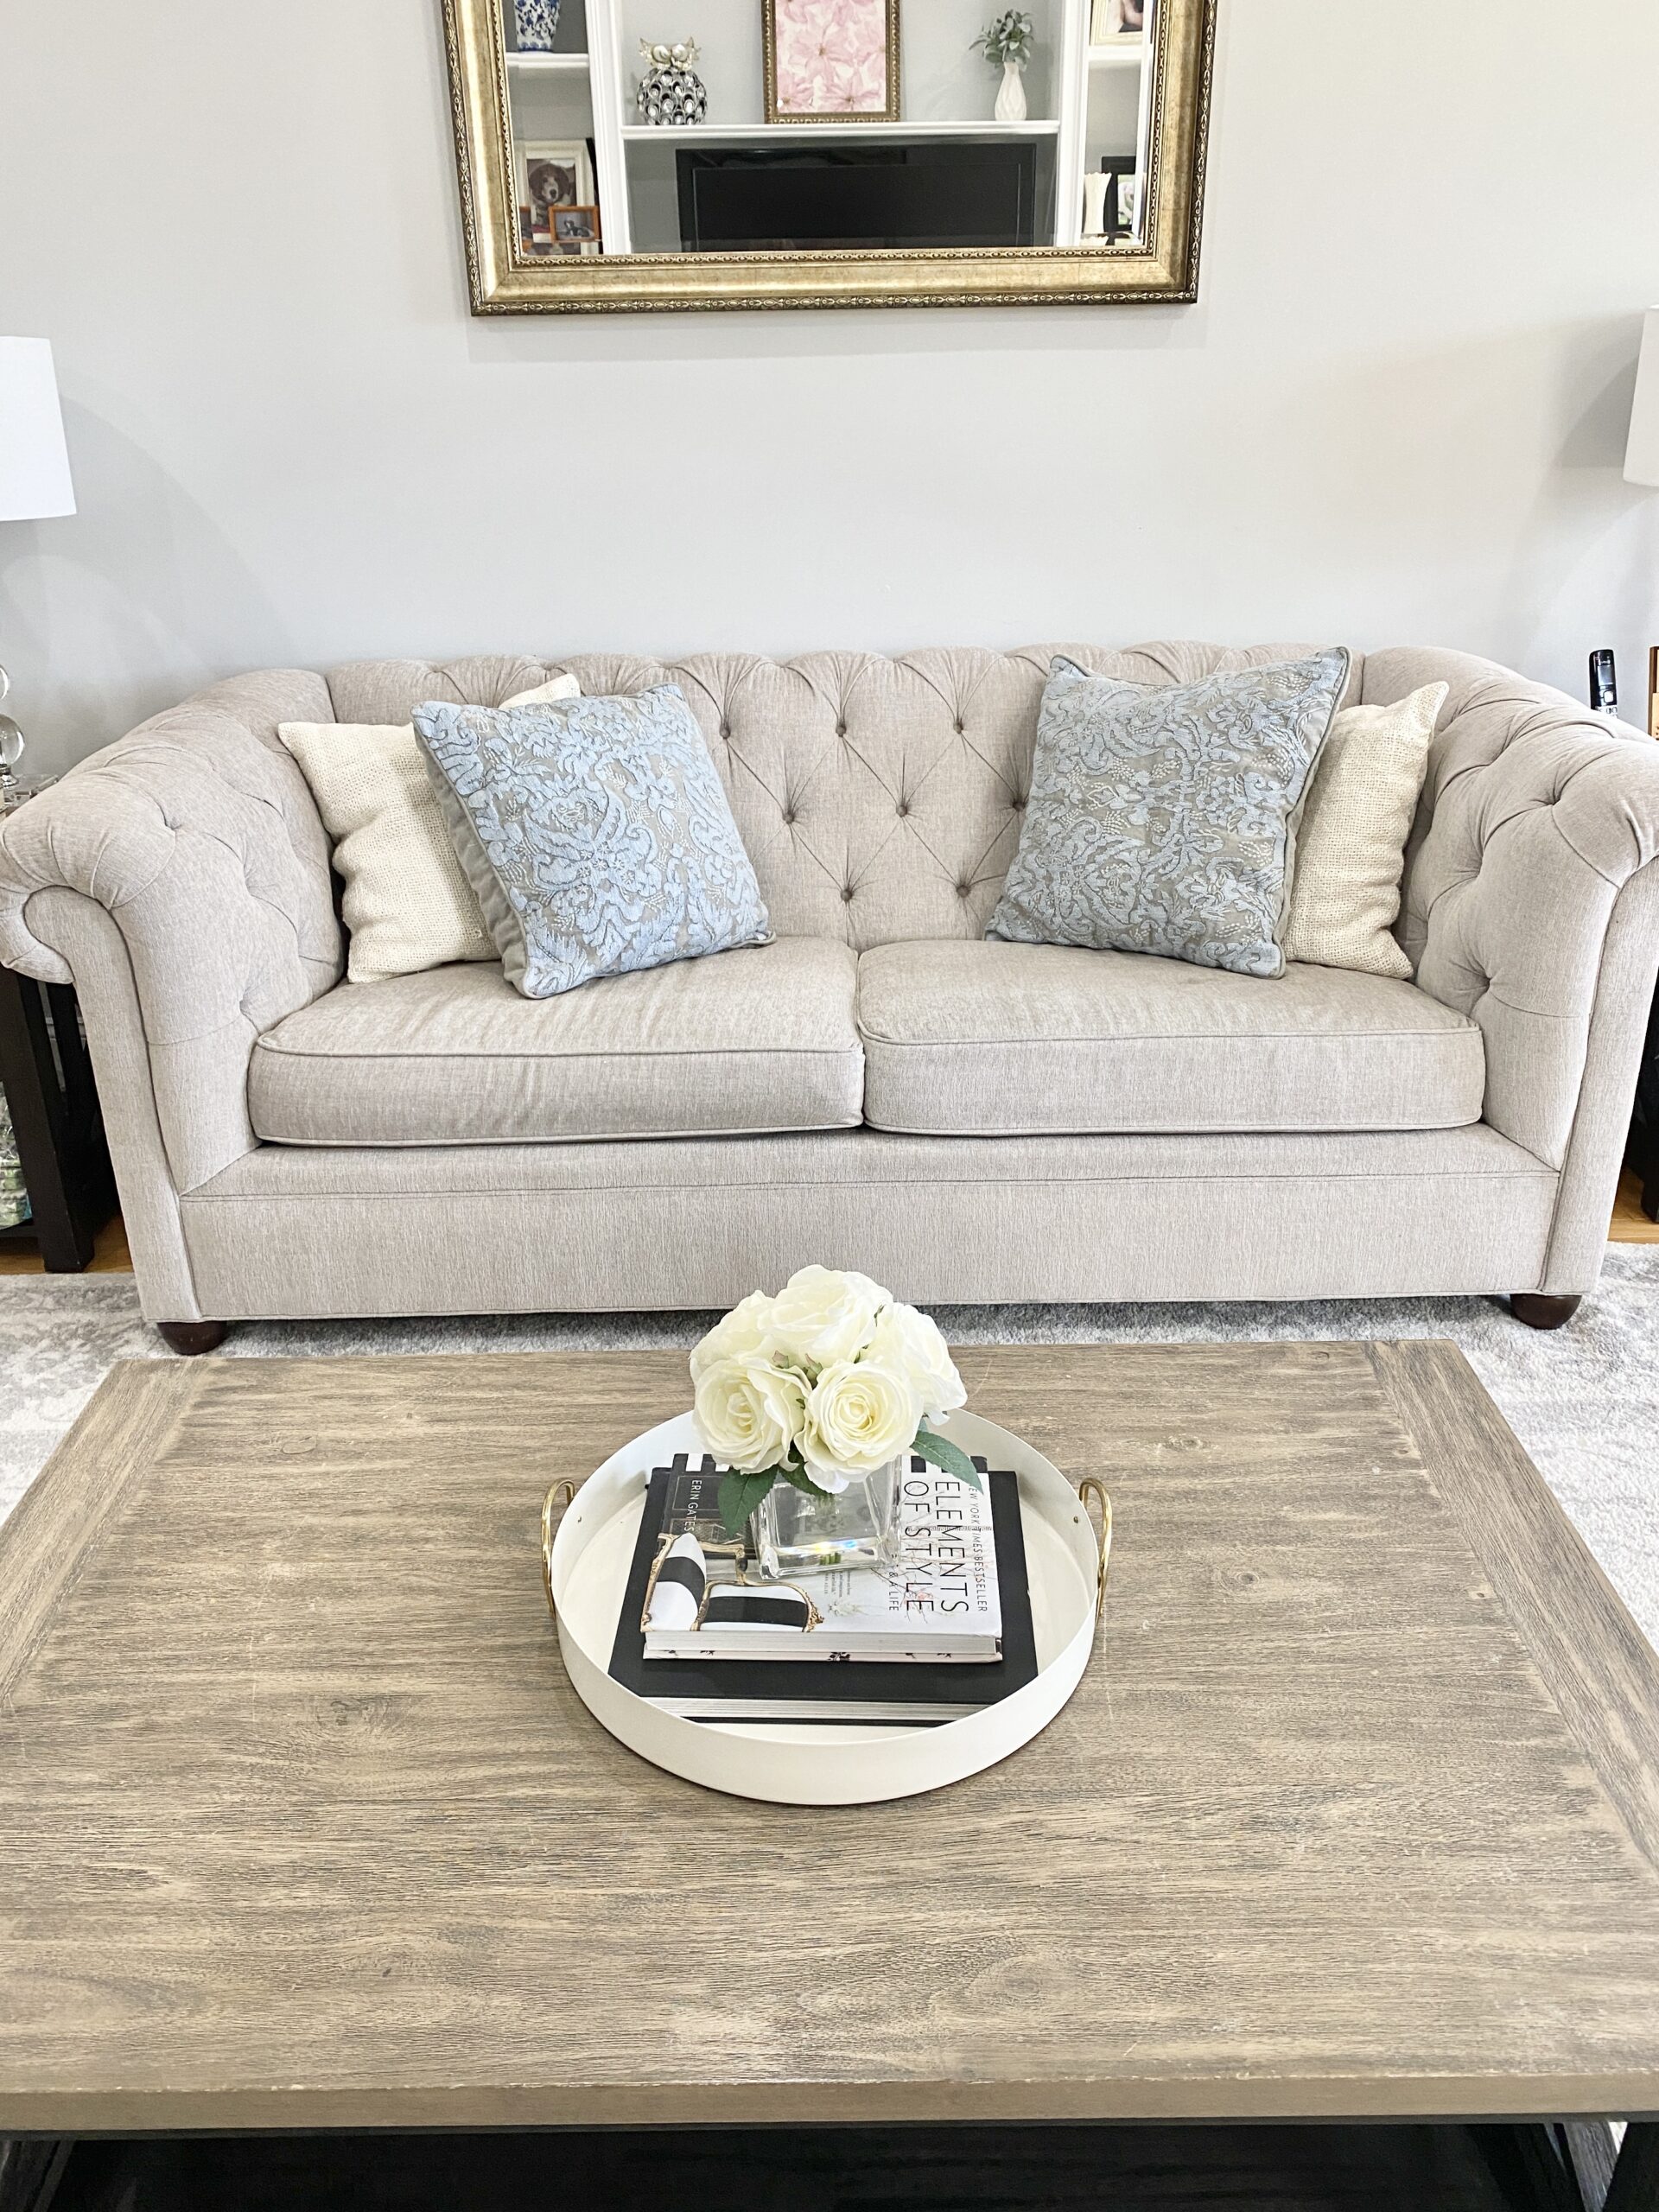 Pottery Barn Sofa Review: What You Should Know Before Buying - Bless'er  House